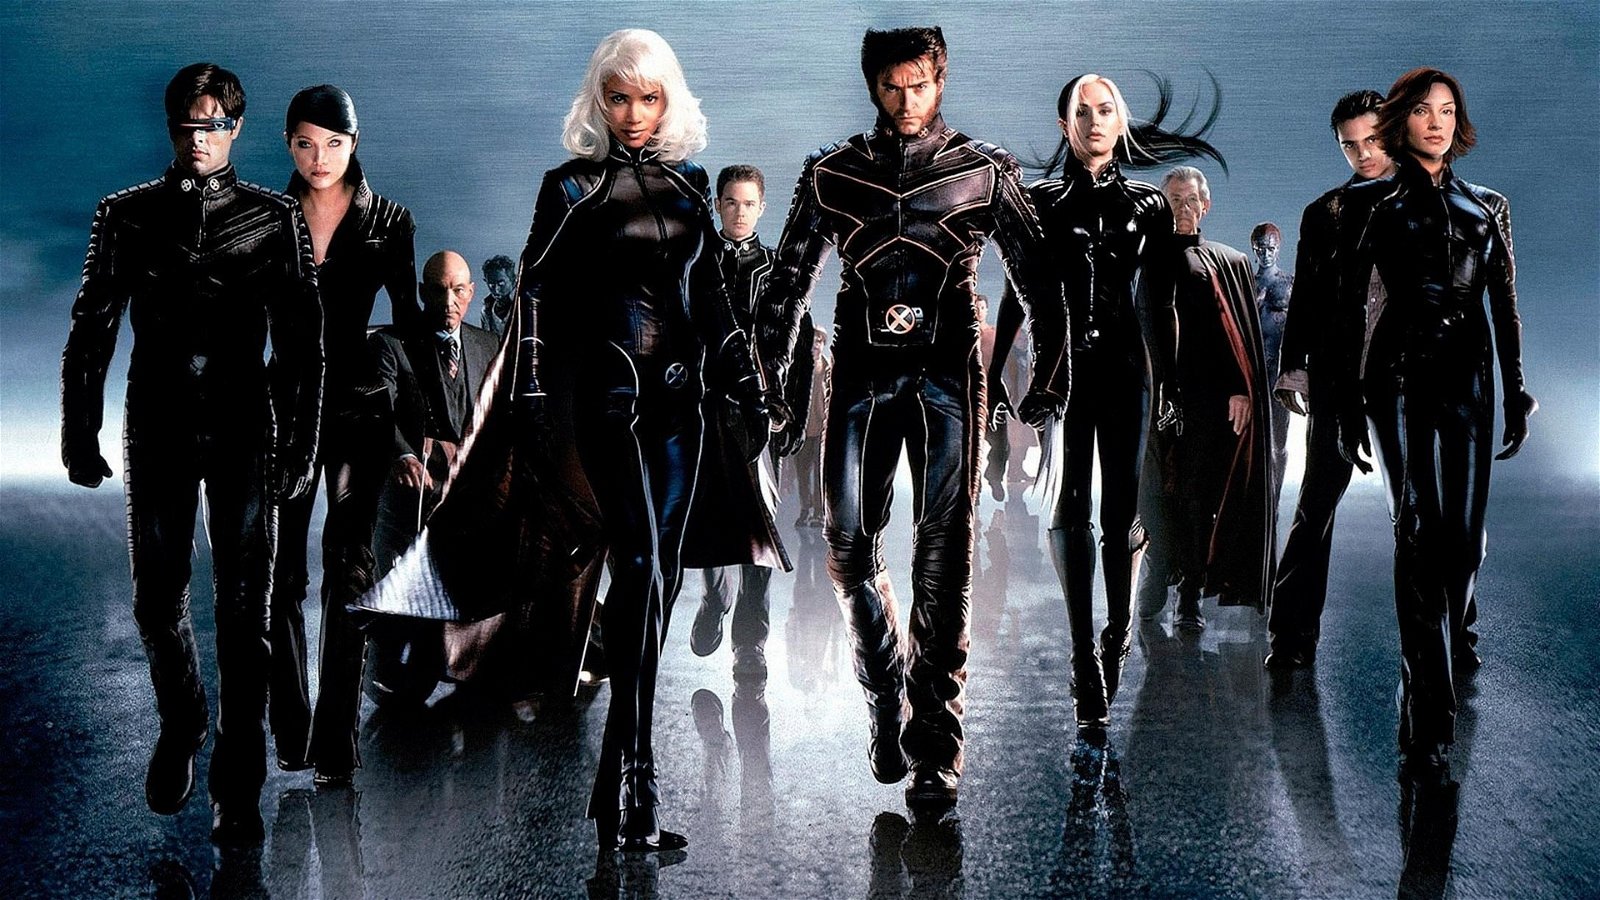 Films of Future Past: Ranking the X-Men Movies 1